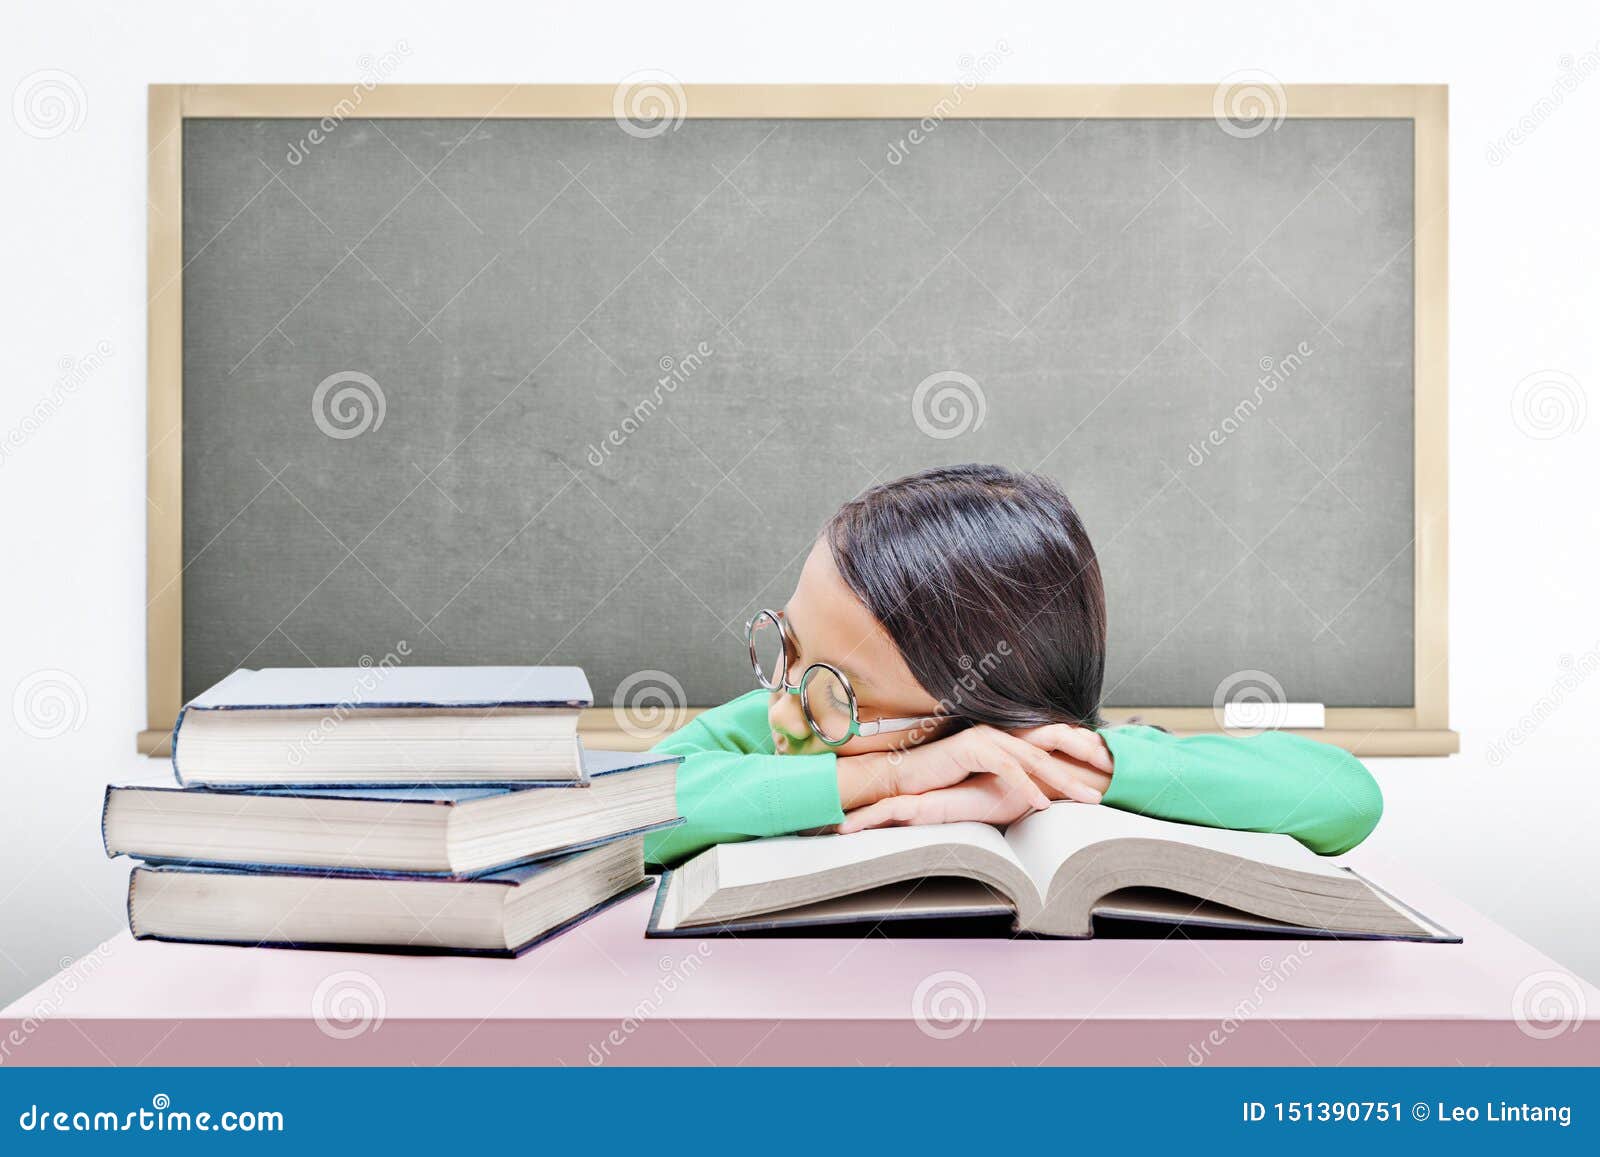 Asian Cute Girl With Glasses Fall Asleep On Book On The Desk Stock